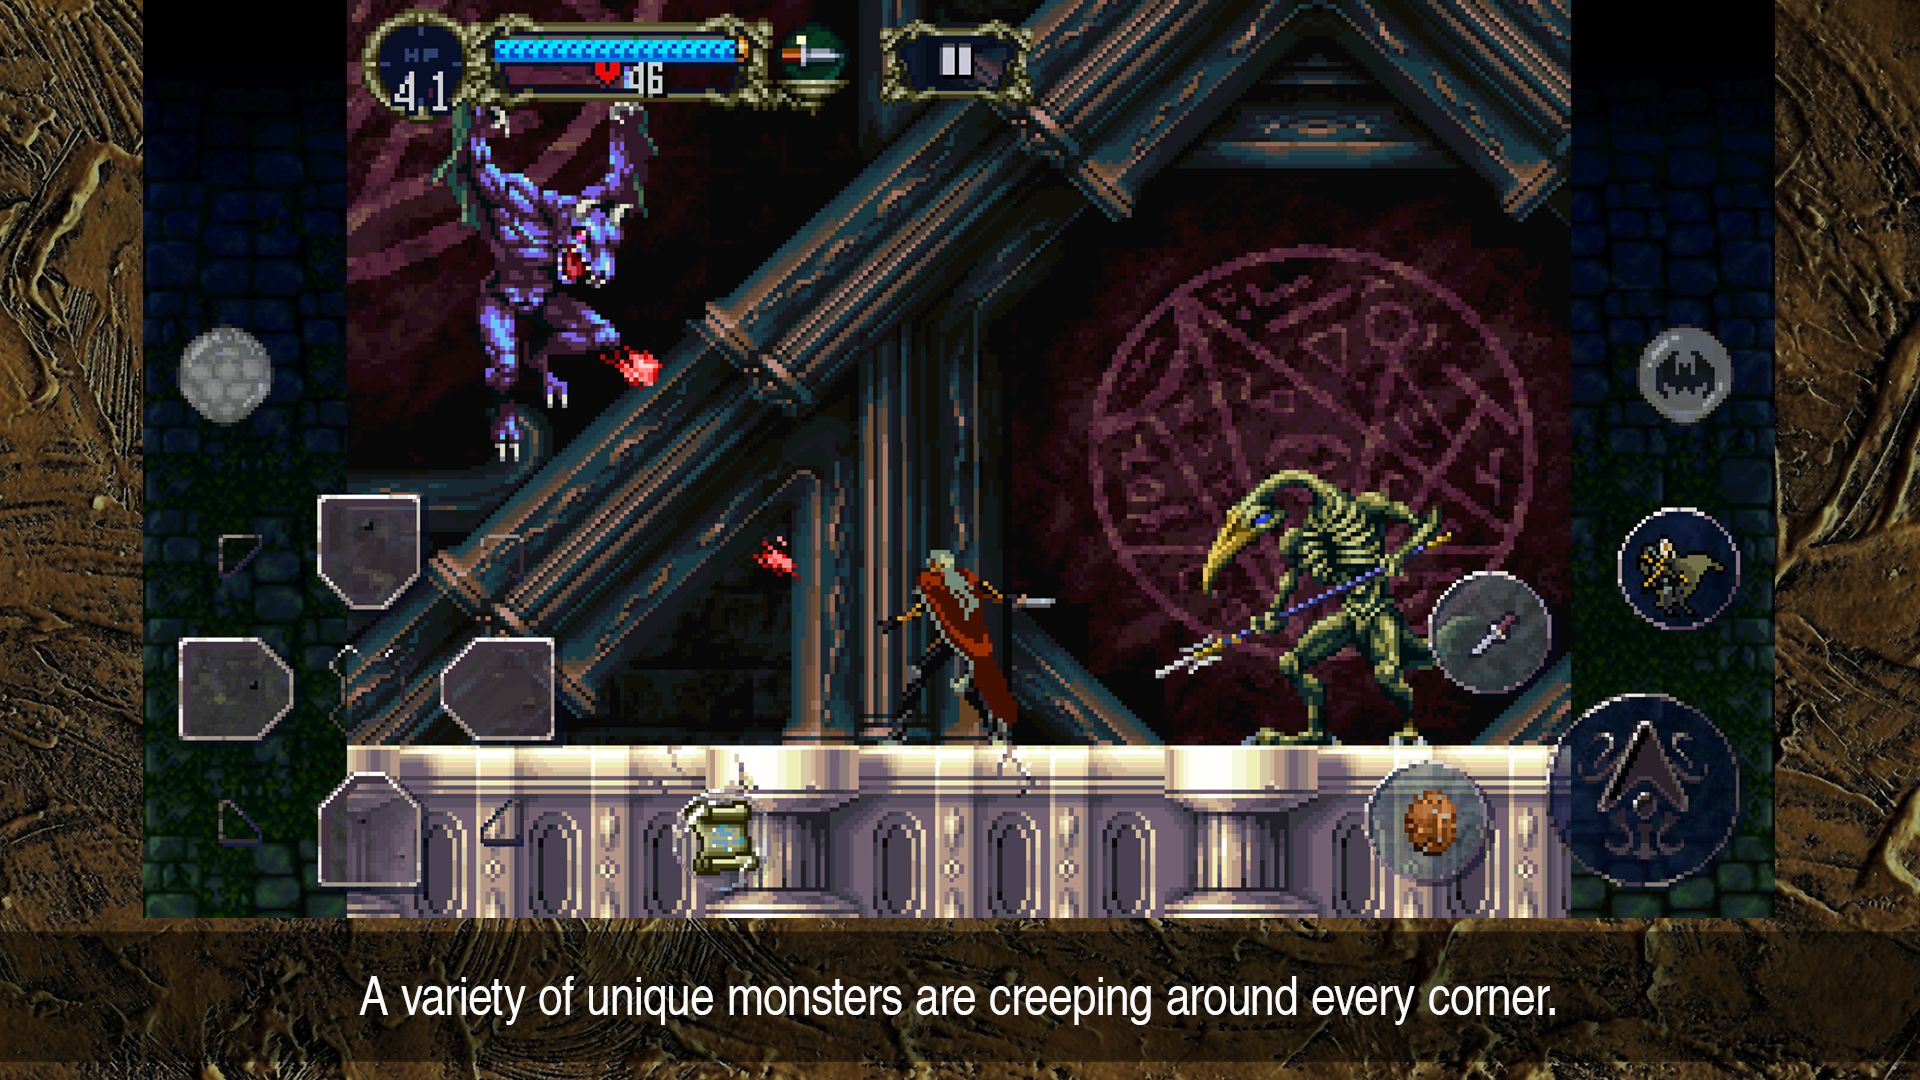 best-metroidvania-games-castlevania-symphony-of-the-night-a-variety-of-unique-monsters-are-creeping-around-every-corner